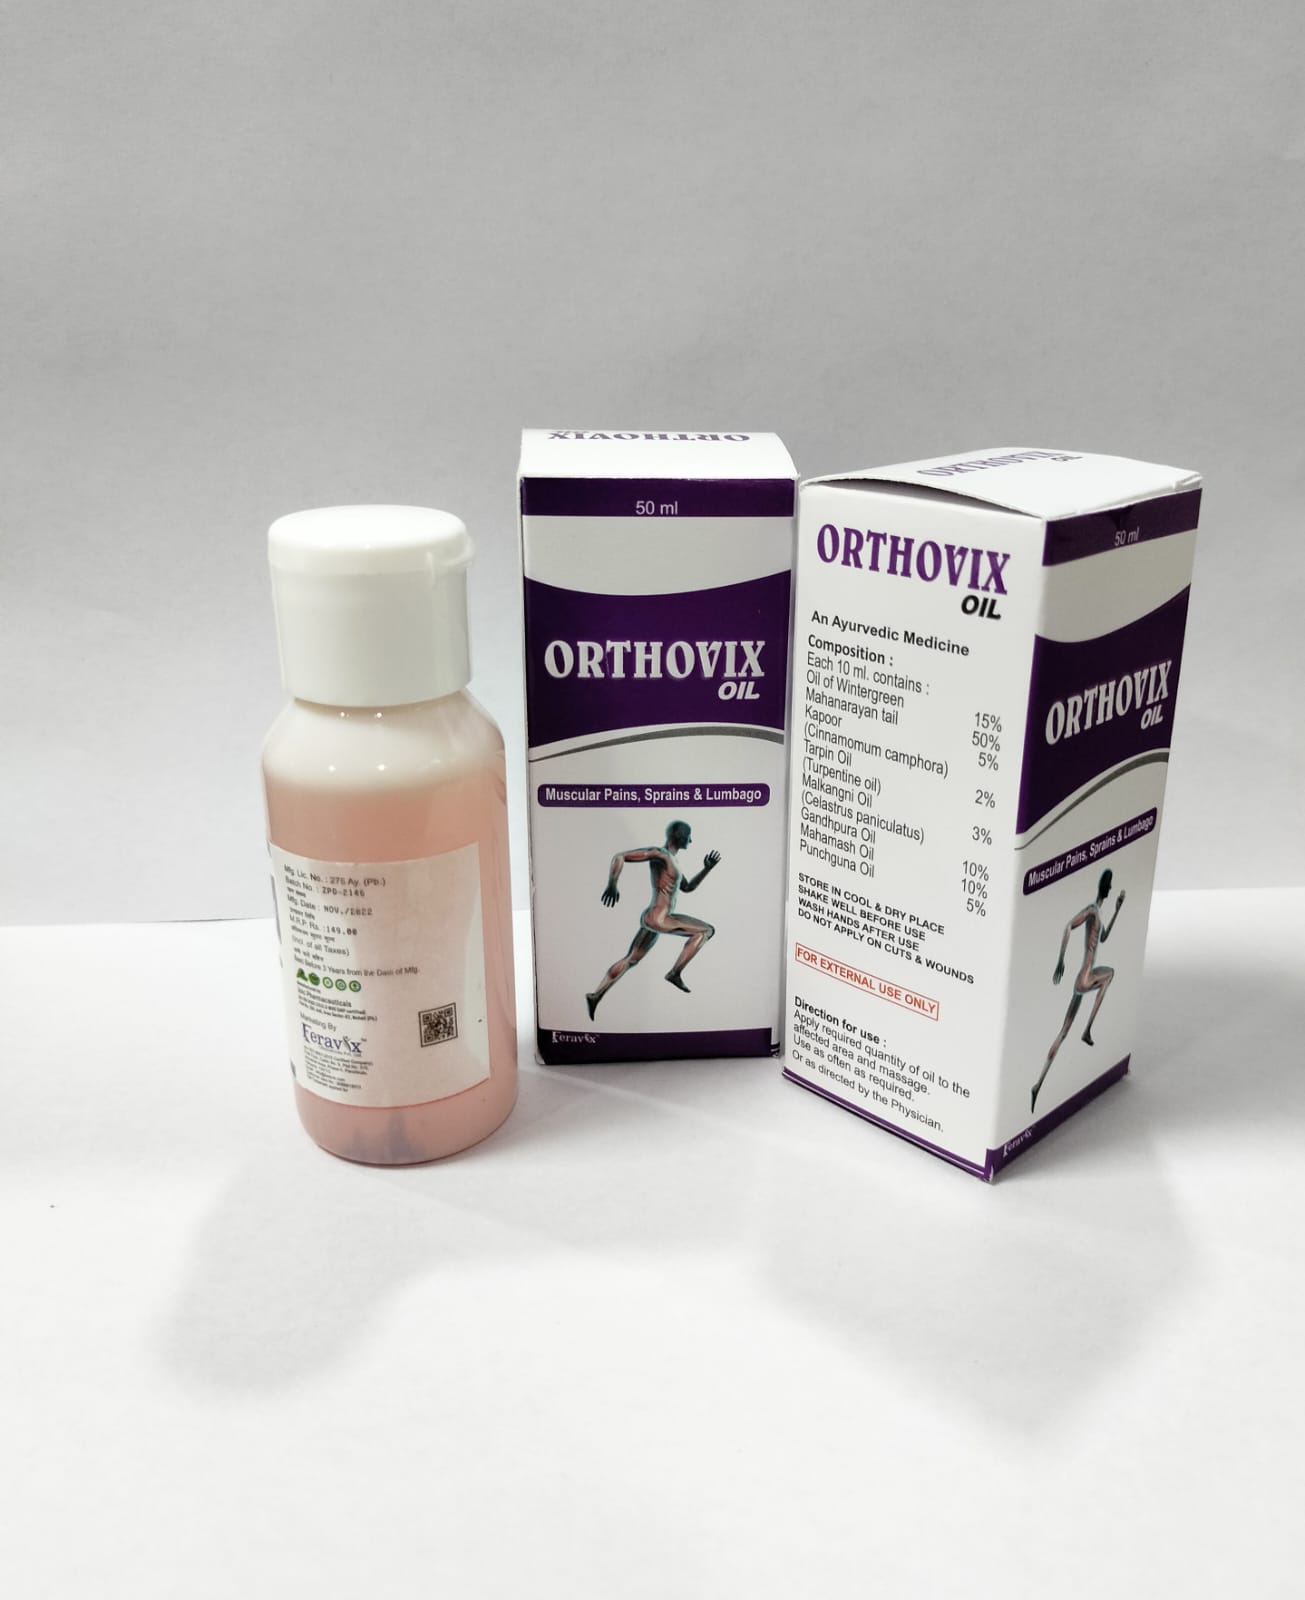 Product Name: ORTHOVIX Oil, Compositions of ORTHOVIX Oil are MASSAGE OIL FOR MUSCULAR PAIN - Feravix Lifesciences